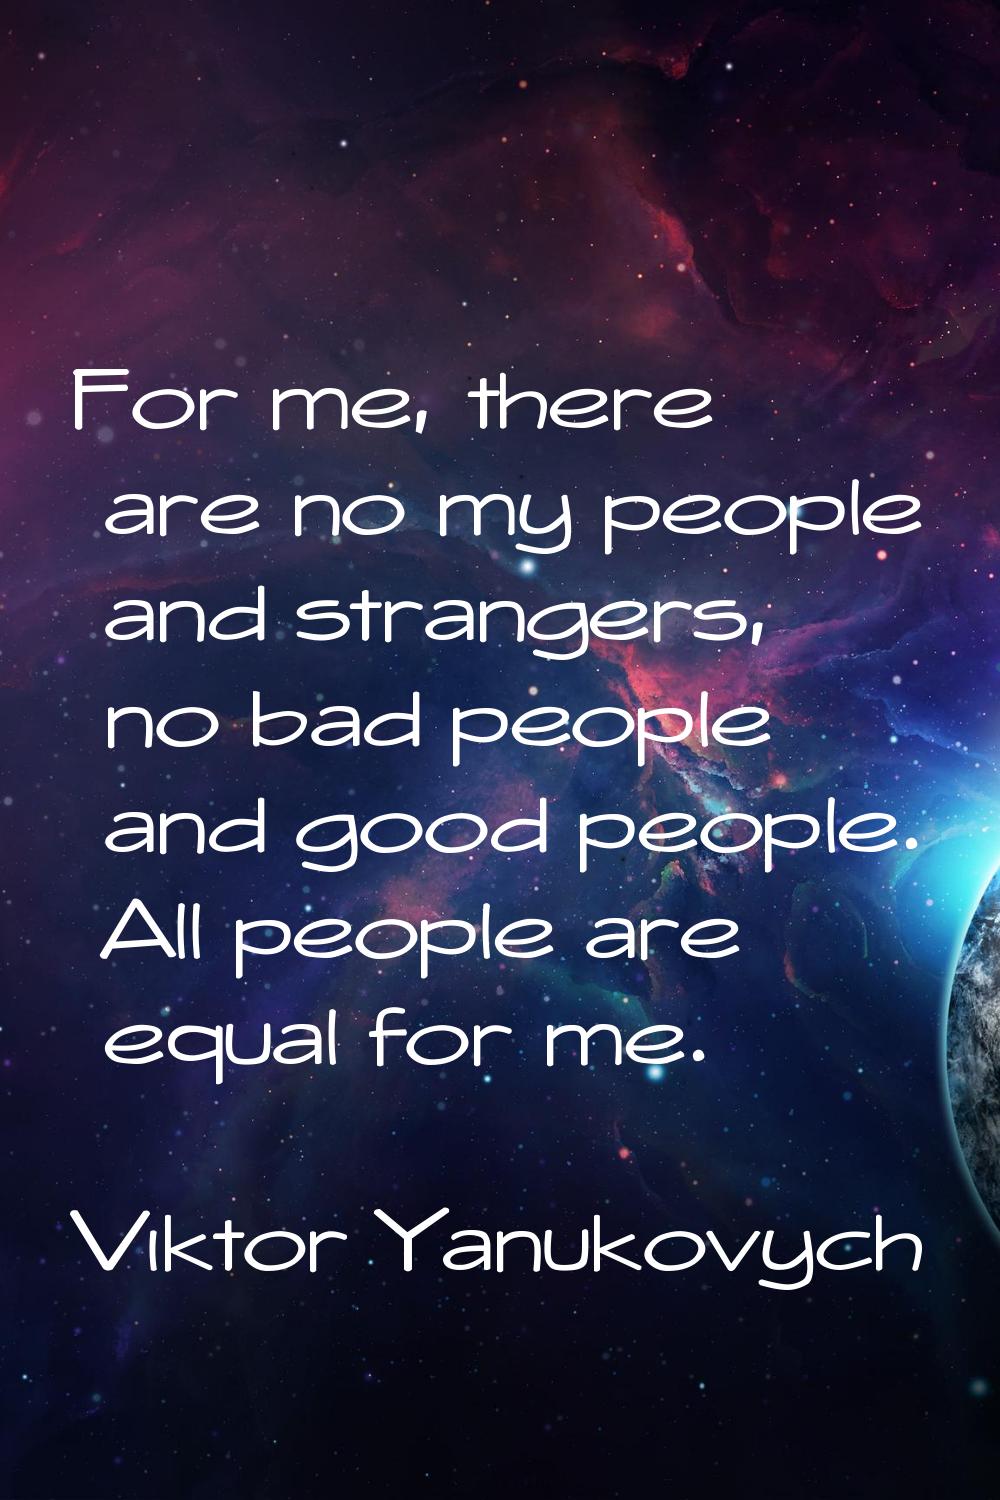 For me, there are no my people and strangers, no bad people and good people. All people are equal f